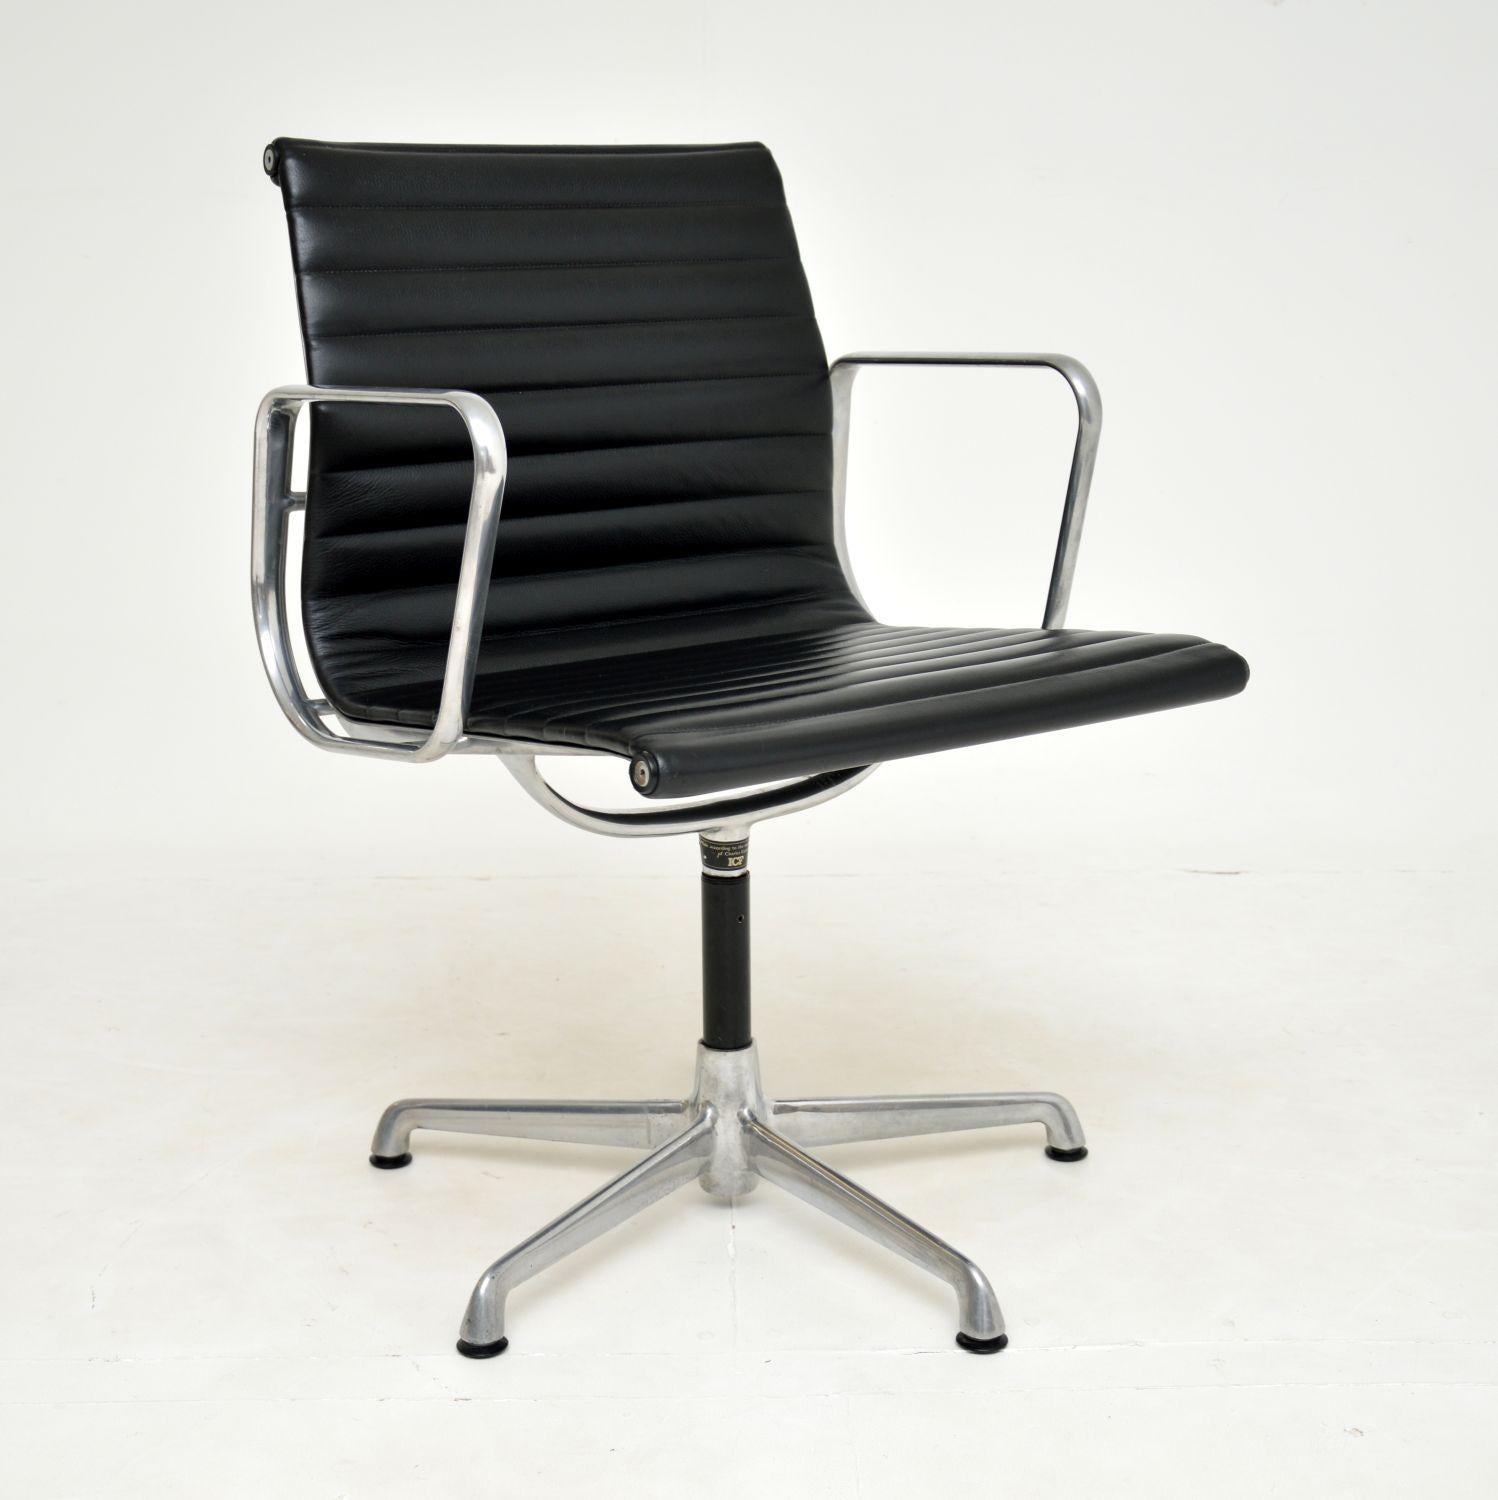 A stunning example of an iconic design, this is a set of ten genuine EA108 swivel chairs designed by Charles Eames. These official licensed models were made in Italy by ICF, they date from around the 1970-1980’s.

They are of superb quality, with